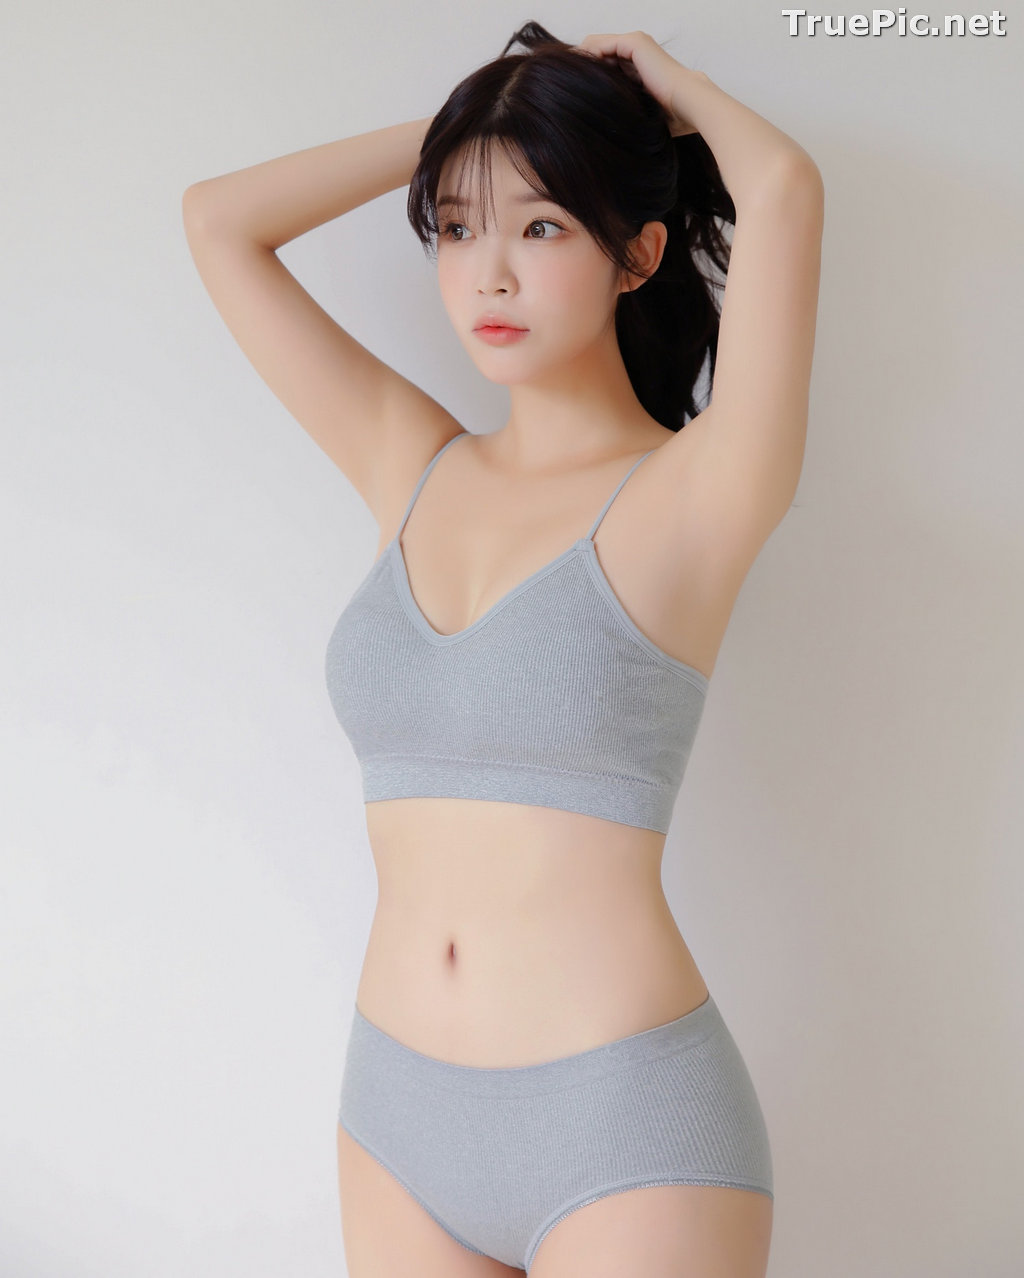 Image Korean Model - Cha Yoo Jin - Daily Tight Lingerie - TruePic.net (21 pictures) - Picture-16